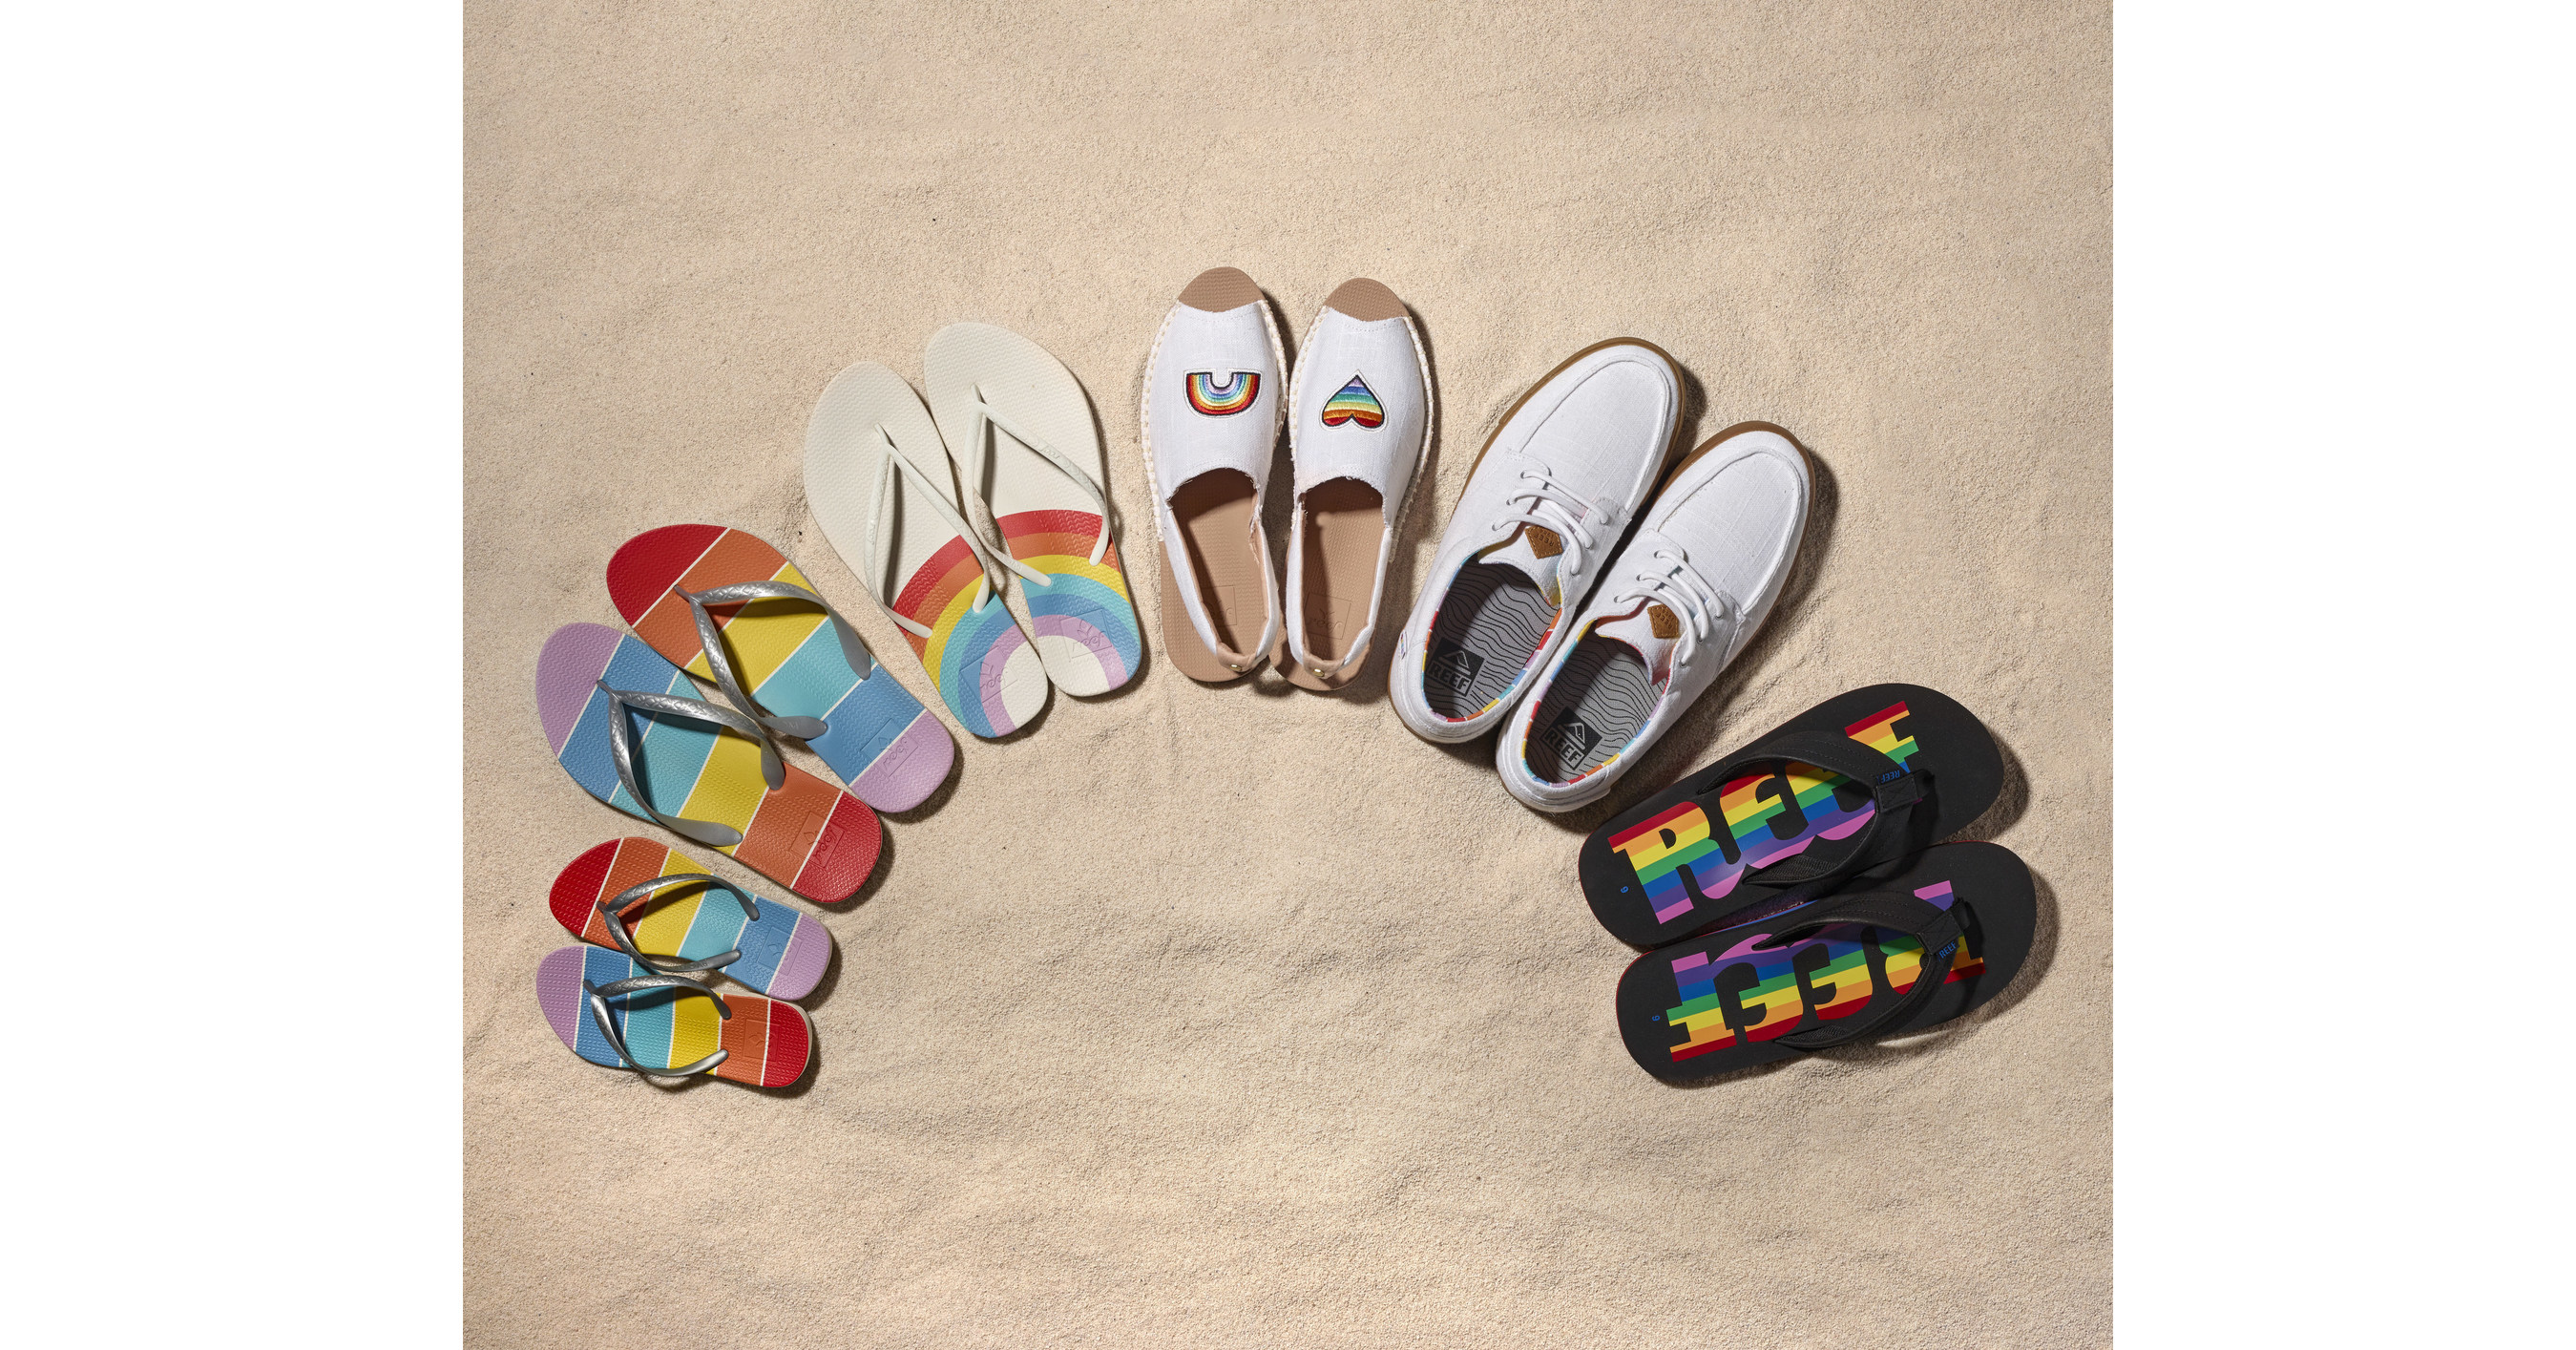 REEF® Celebrates LGBTQ+ Community with Charitable Pride Collection